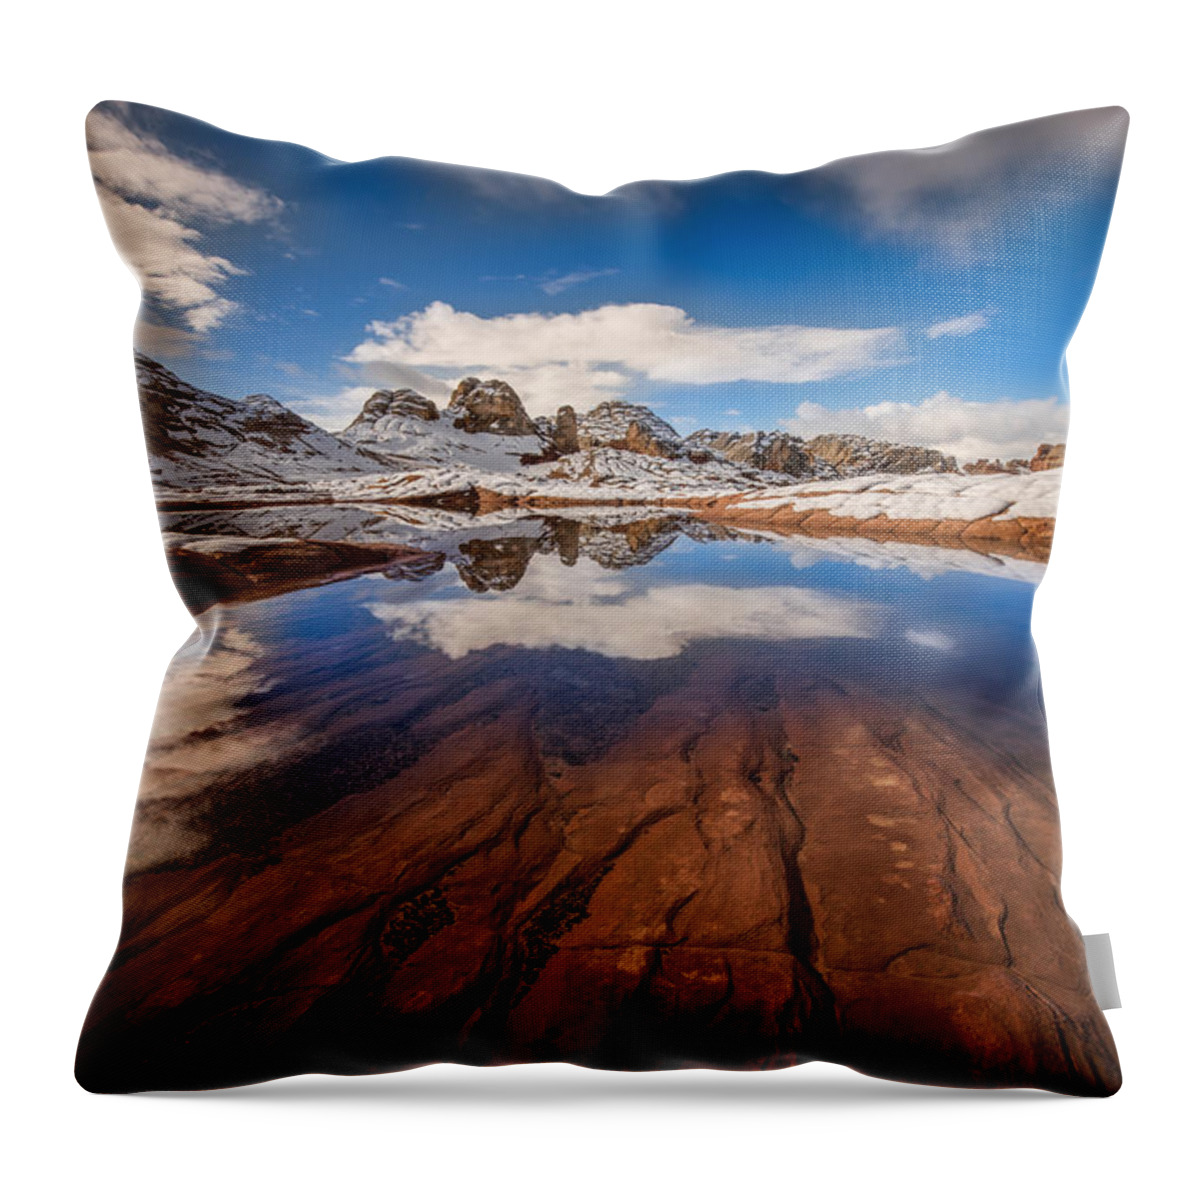 White Pocket Throw Pillow featuring the photograph White Pocket Northern Arizona by Larry Marshall